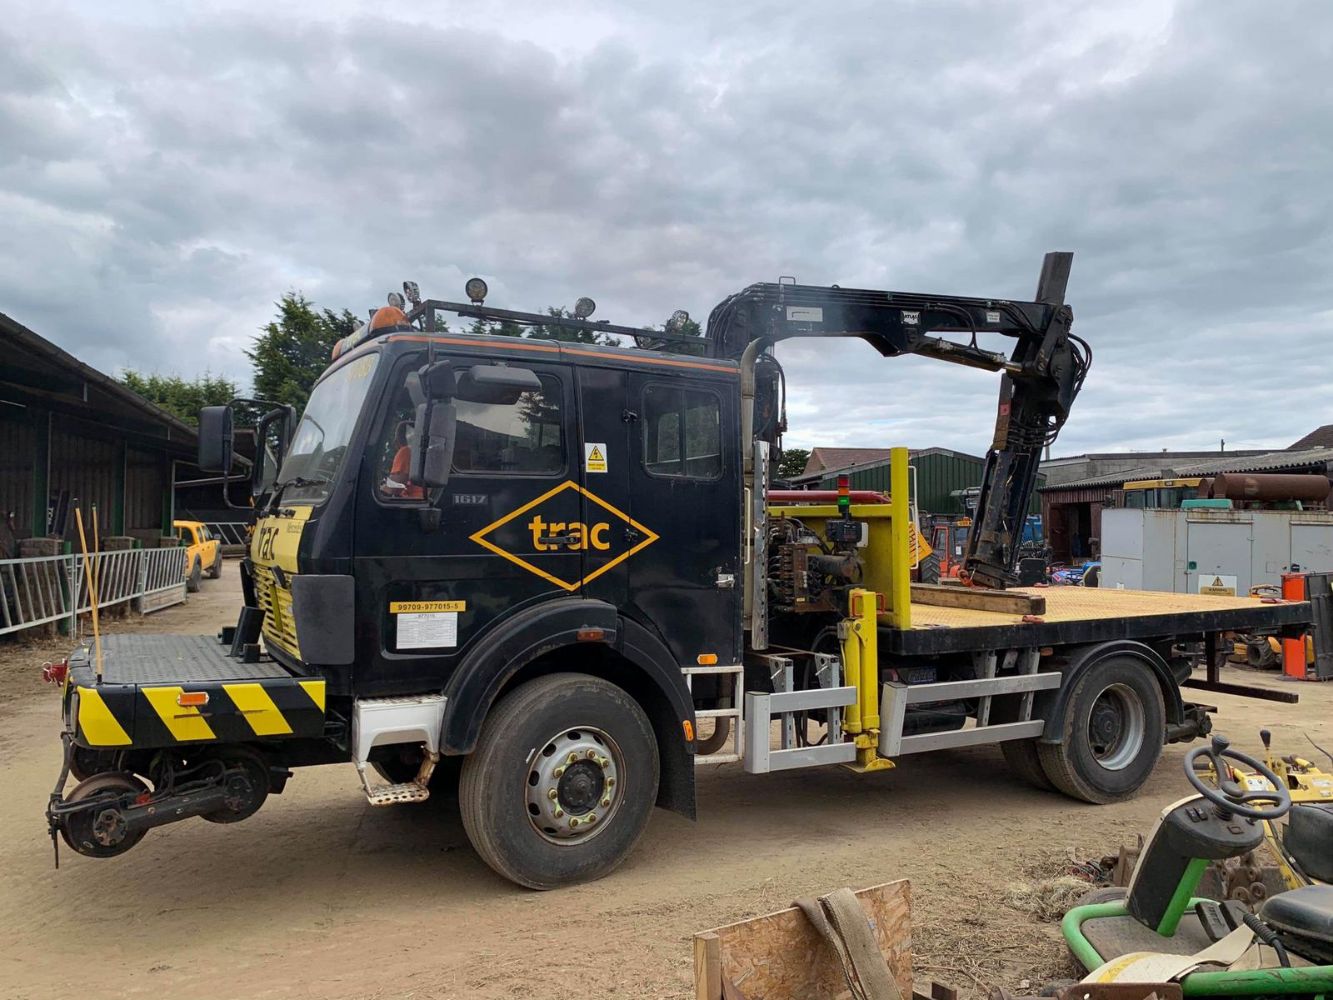 MERCEDES-BENZ CVS 1617AK CREW CAB 6.0 CRANE / FLAT BED, DITCH WITCH, VAUXHALL CORSA, ASTRA, MOWERS, FORKLIFTS, BACKHOE, ENDS FROM 7PM THURSDAY!